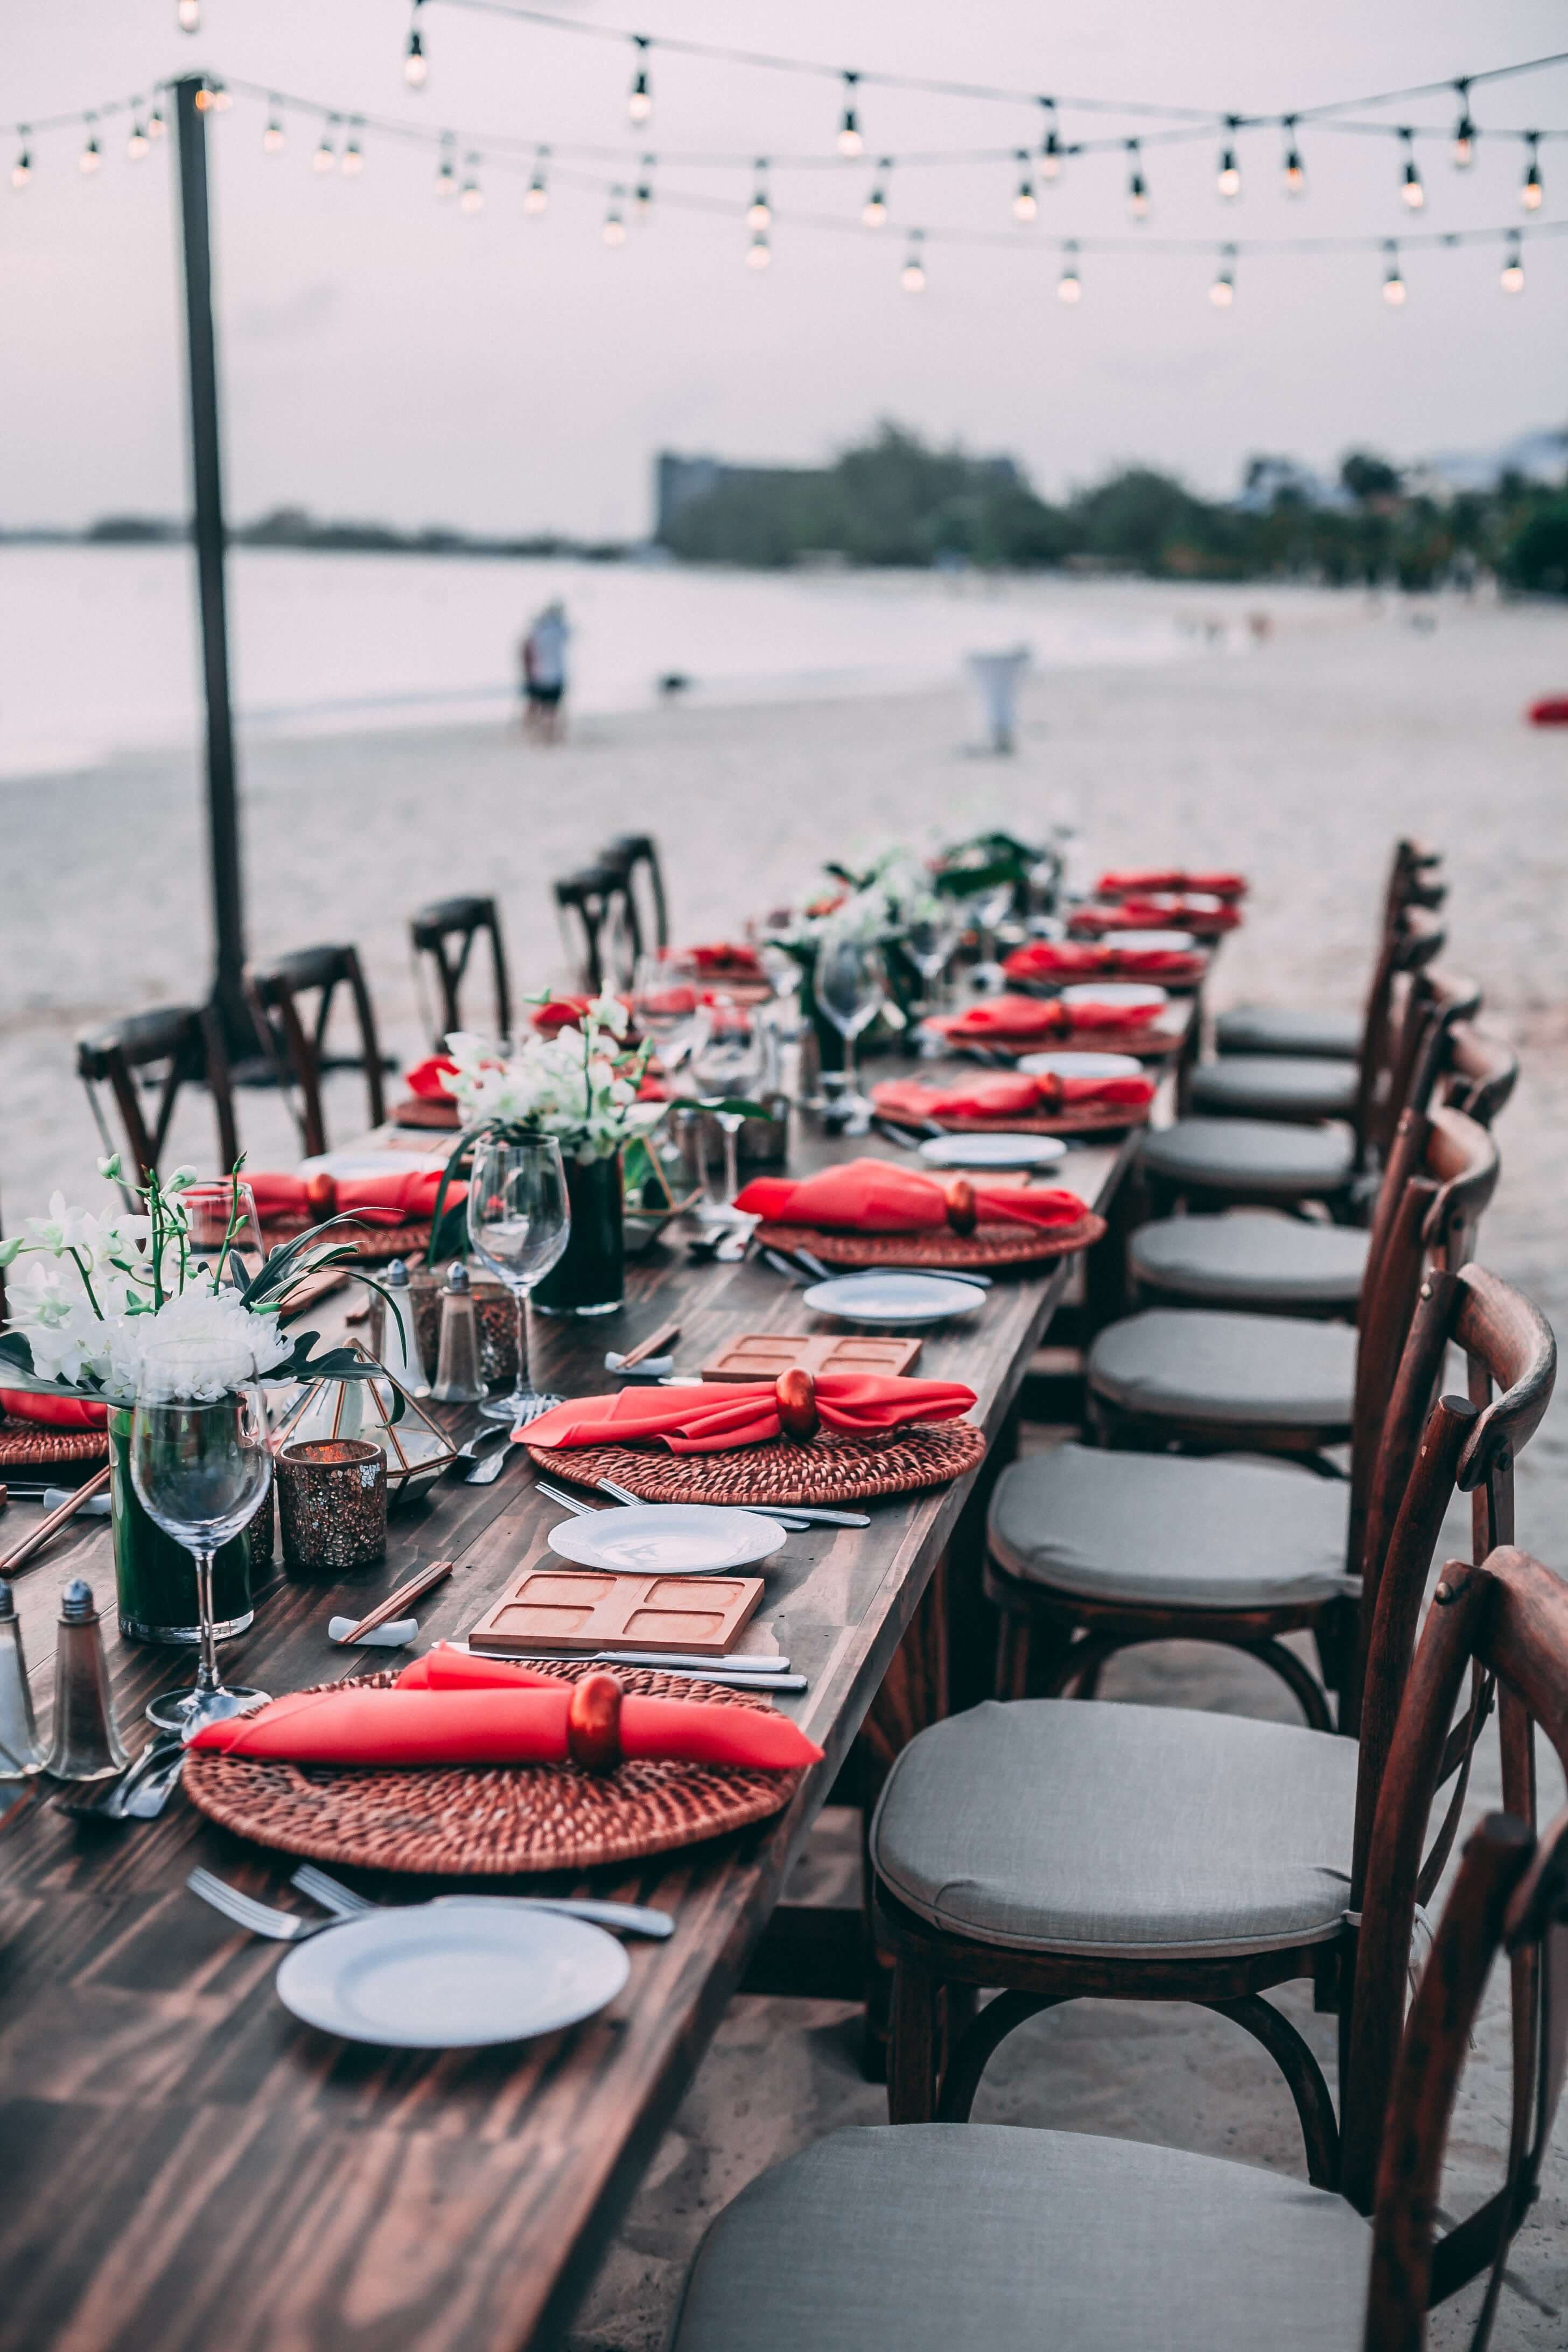 A beach table set up for a wedding event held at the beach.